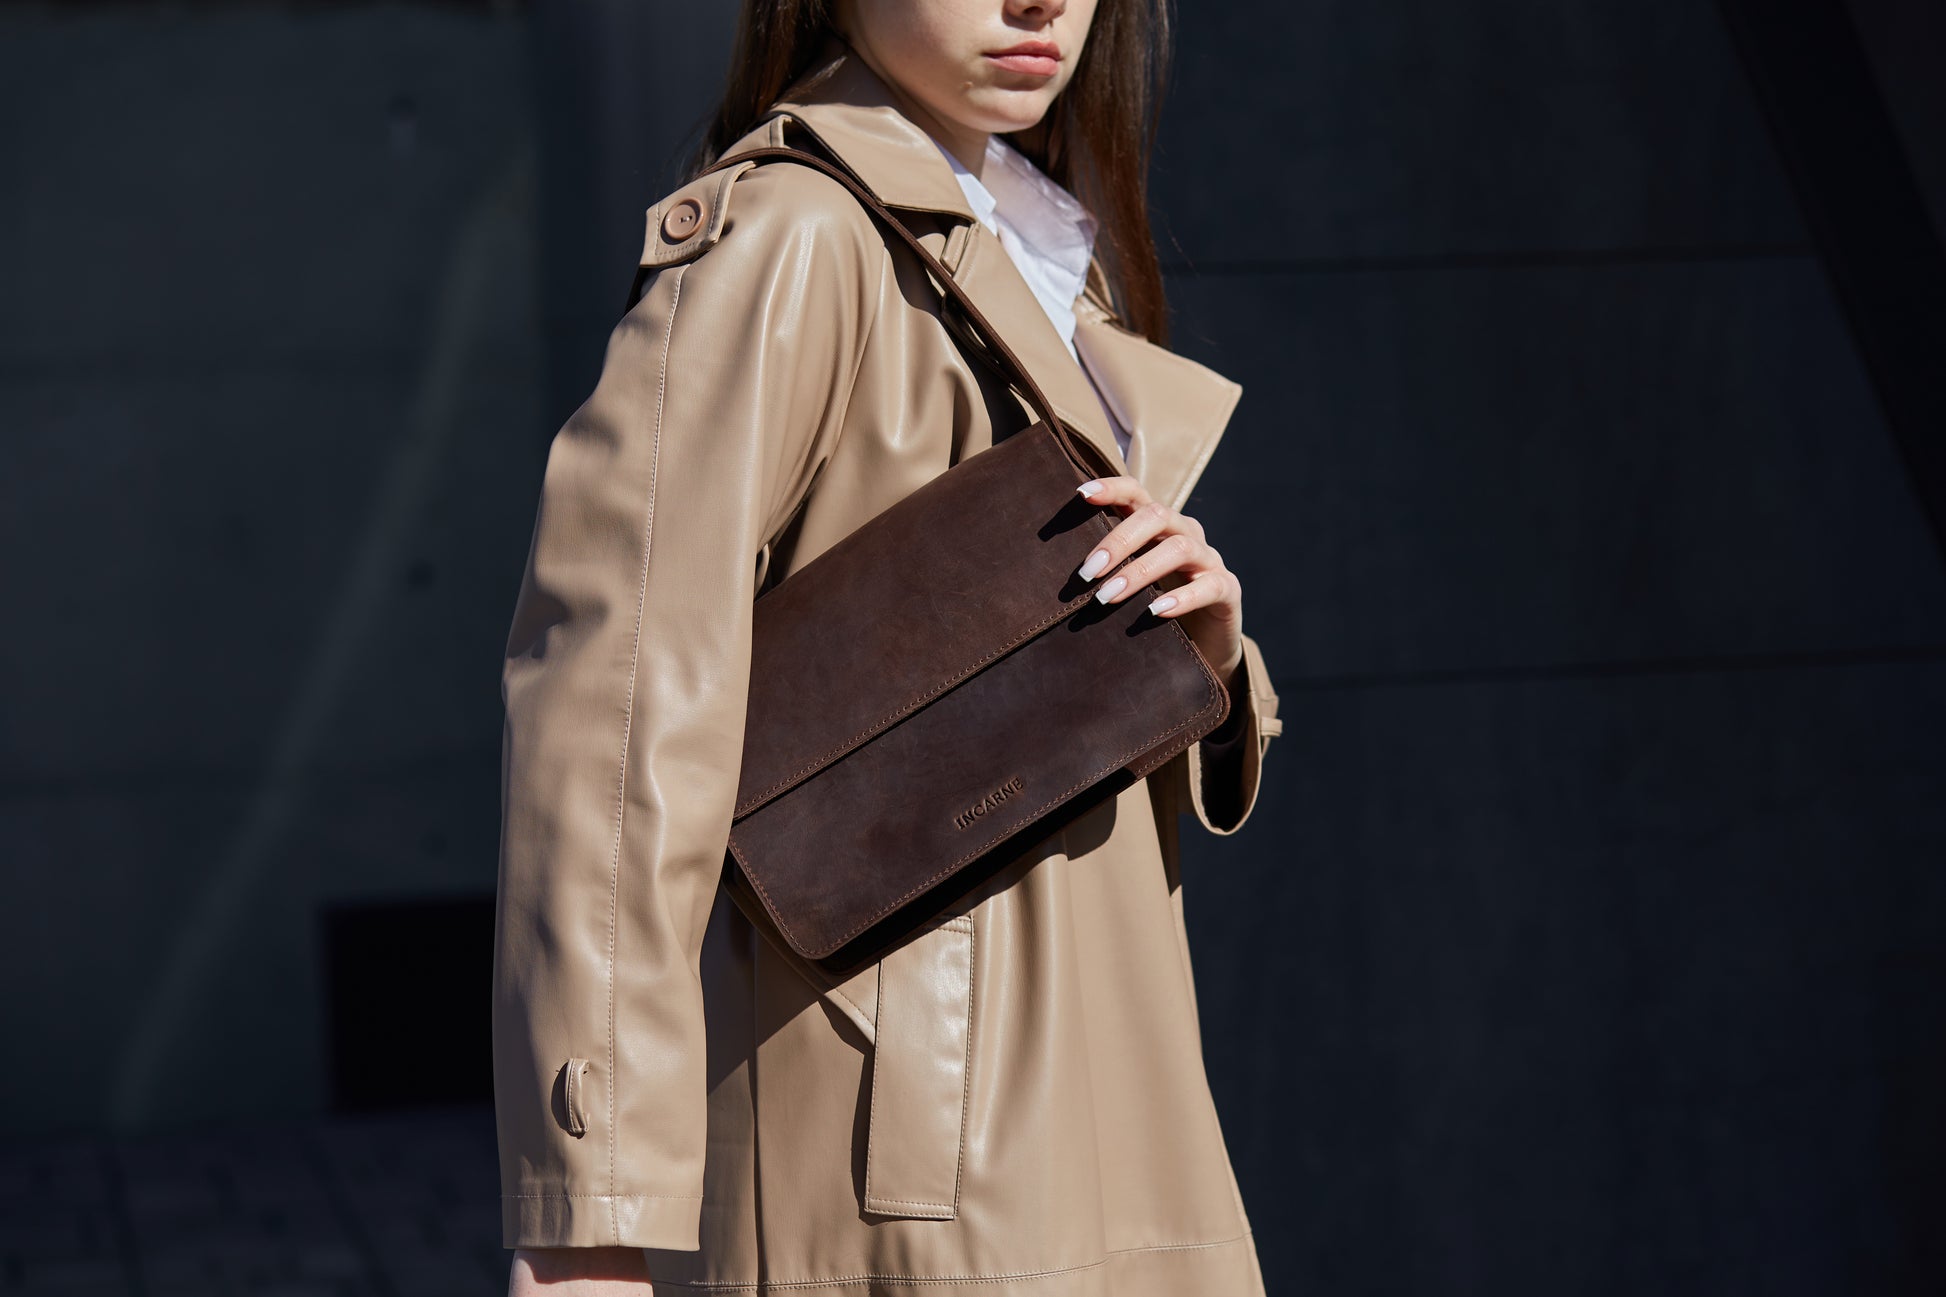 unisex brown leather bag for women